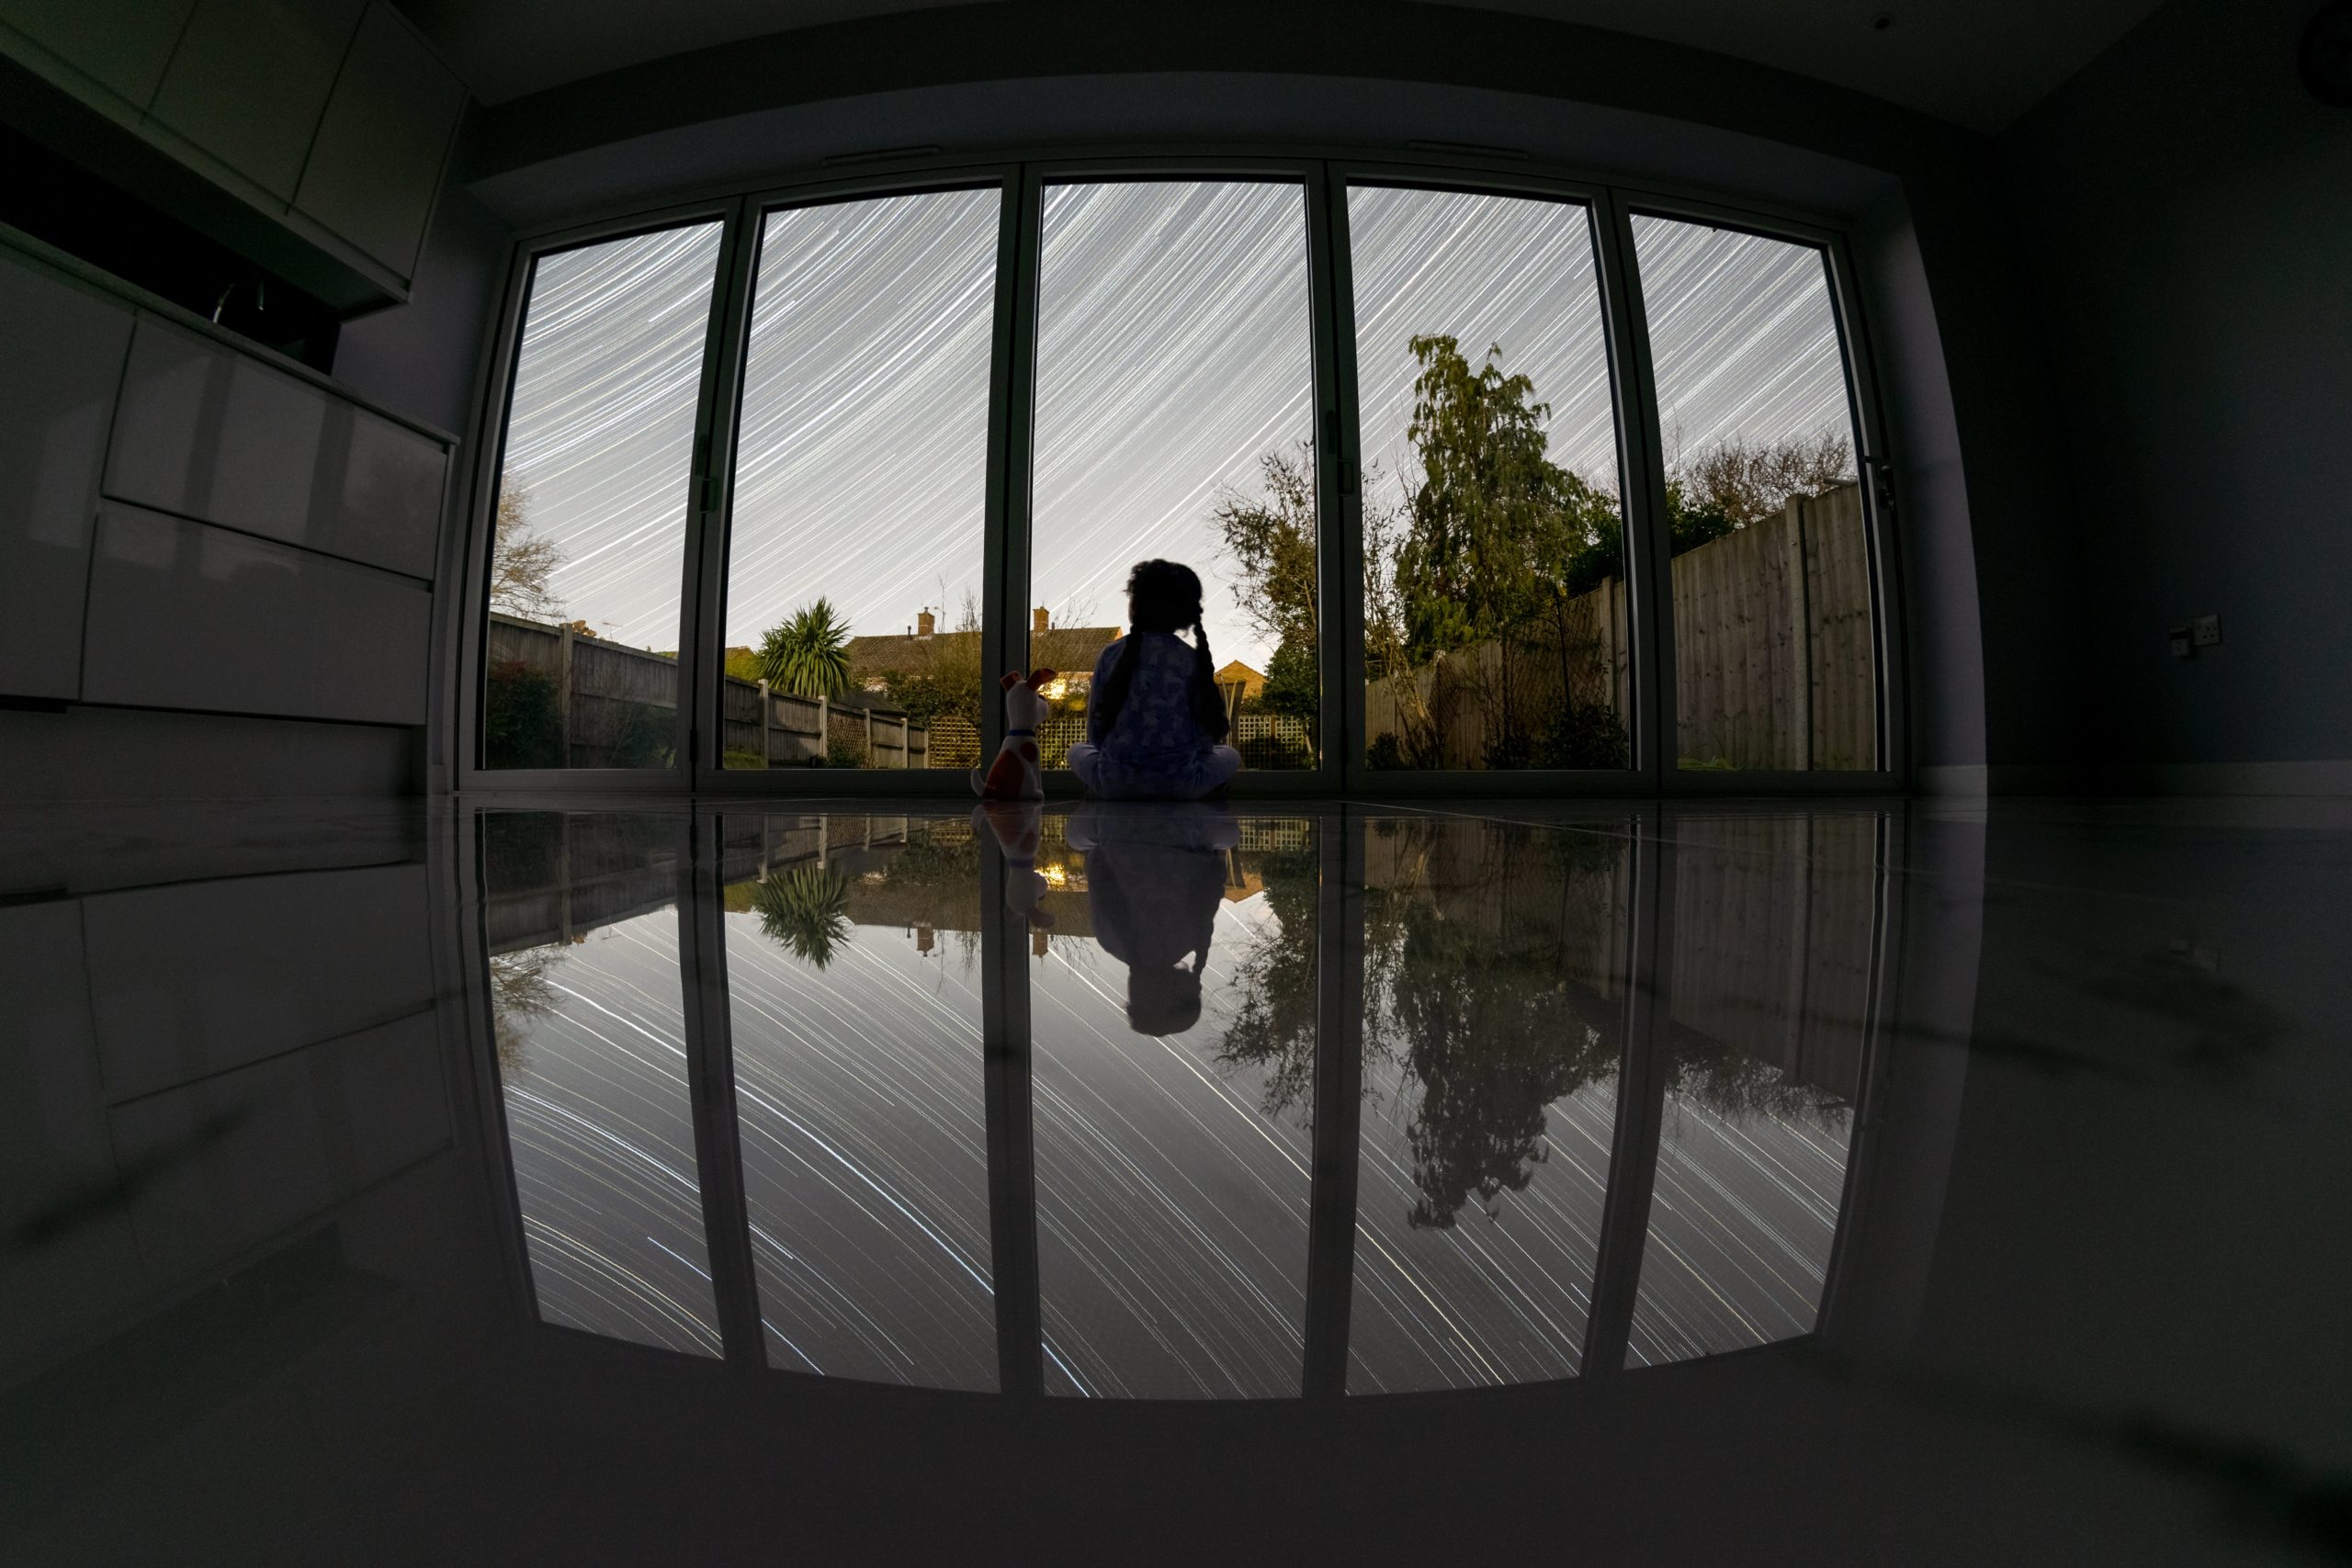 The silhouette of the photographer's child in front of the night sky during lockdown. (Photo: Deepal Ratnayaka)